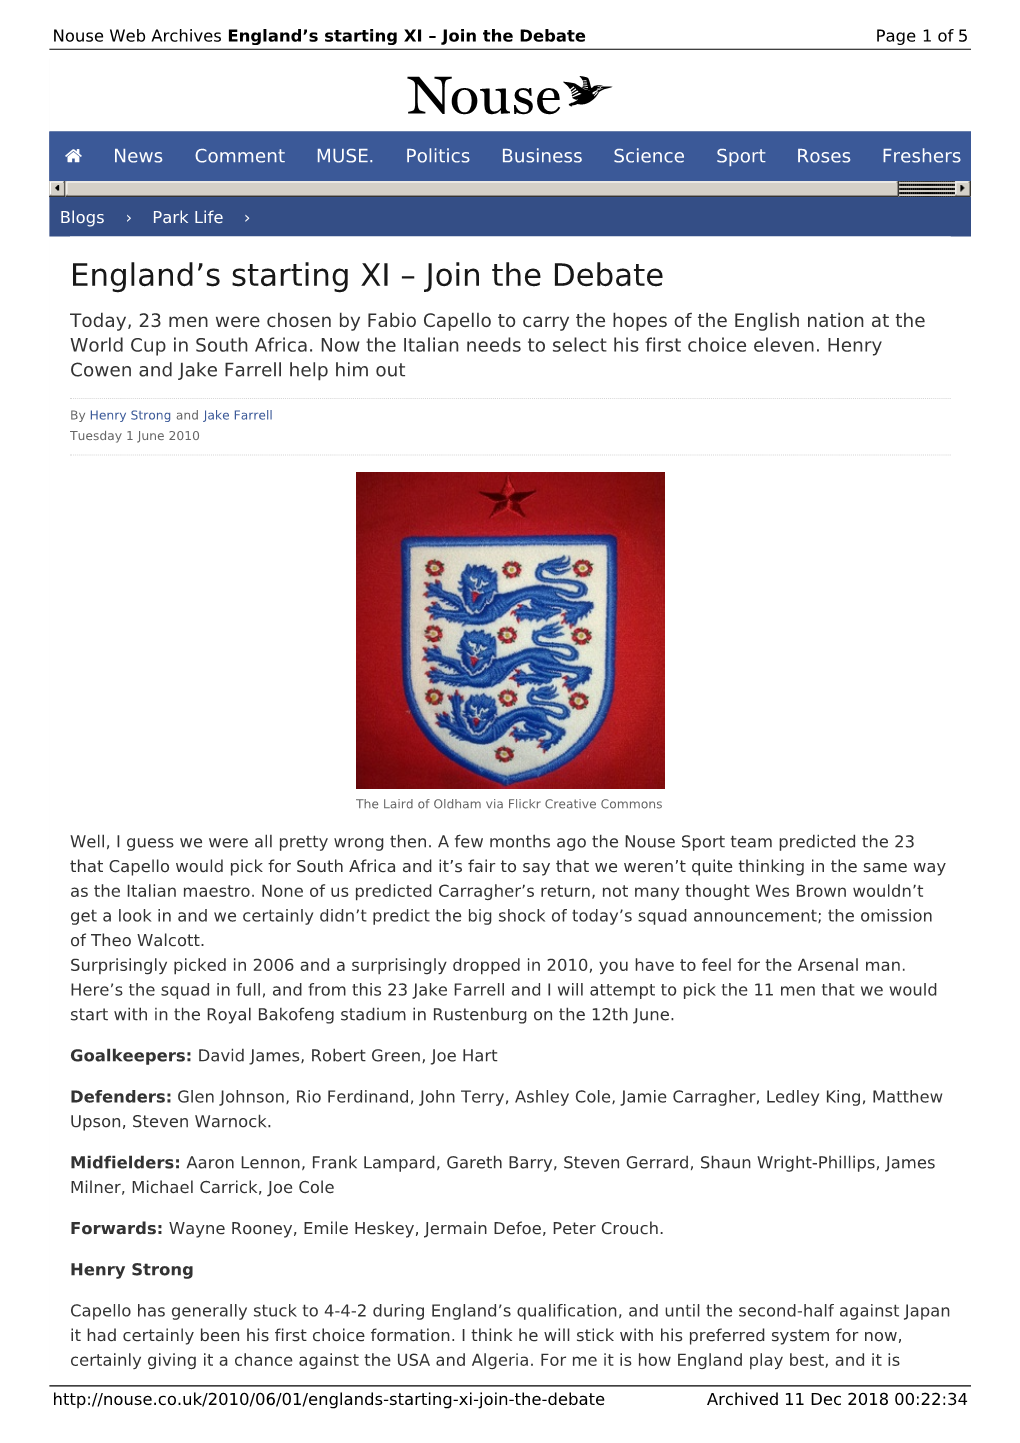 England's Starting XI – Join the Debate | Nouse